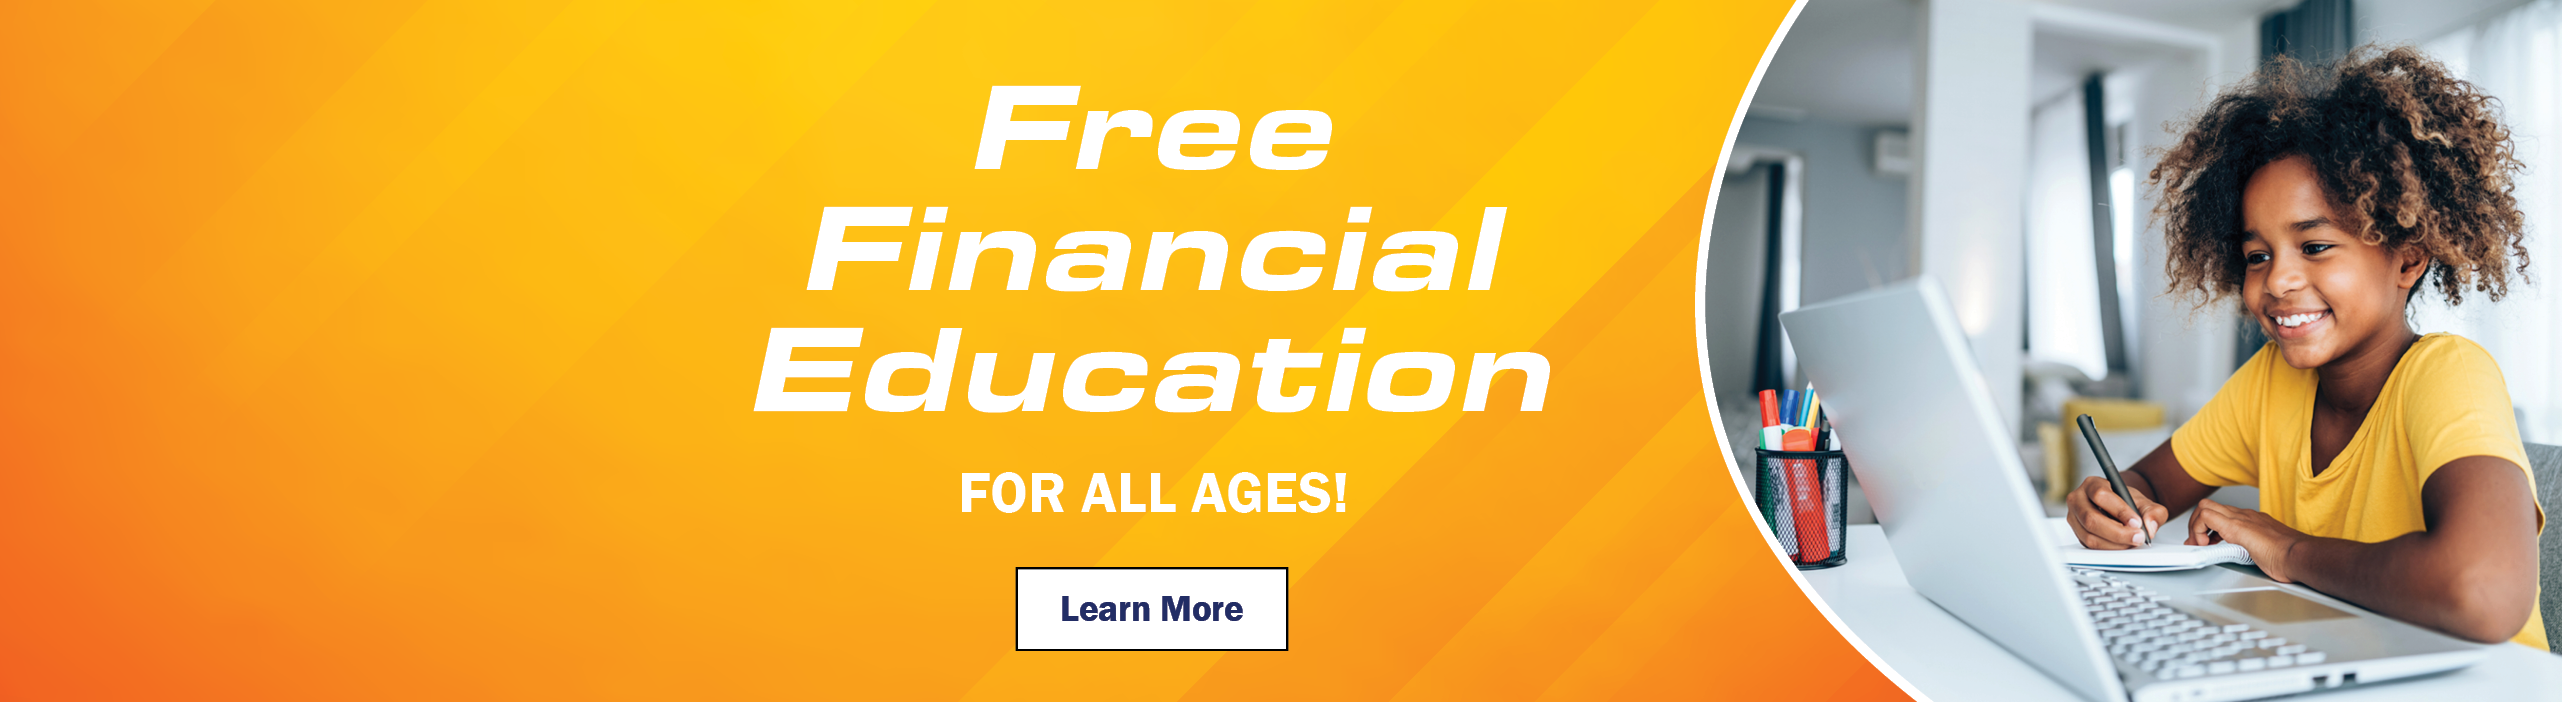 Free Financial Education For All Ages!

Learn More